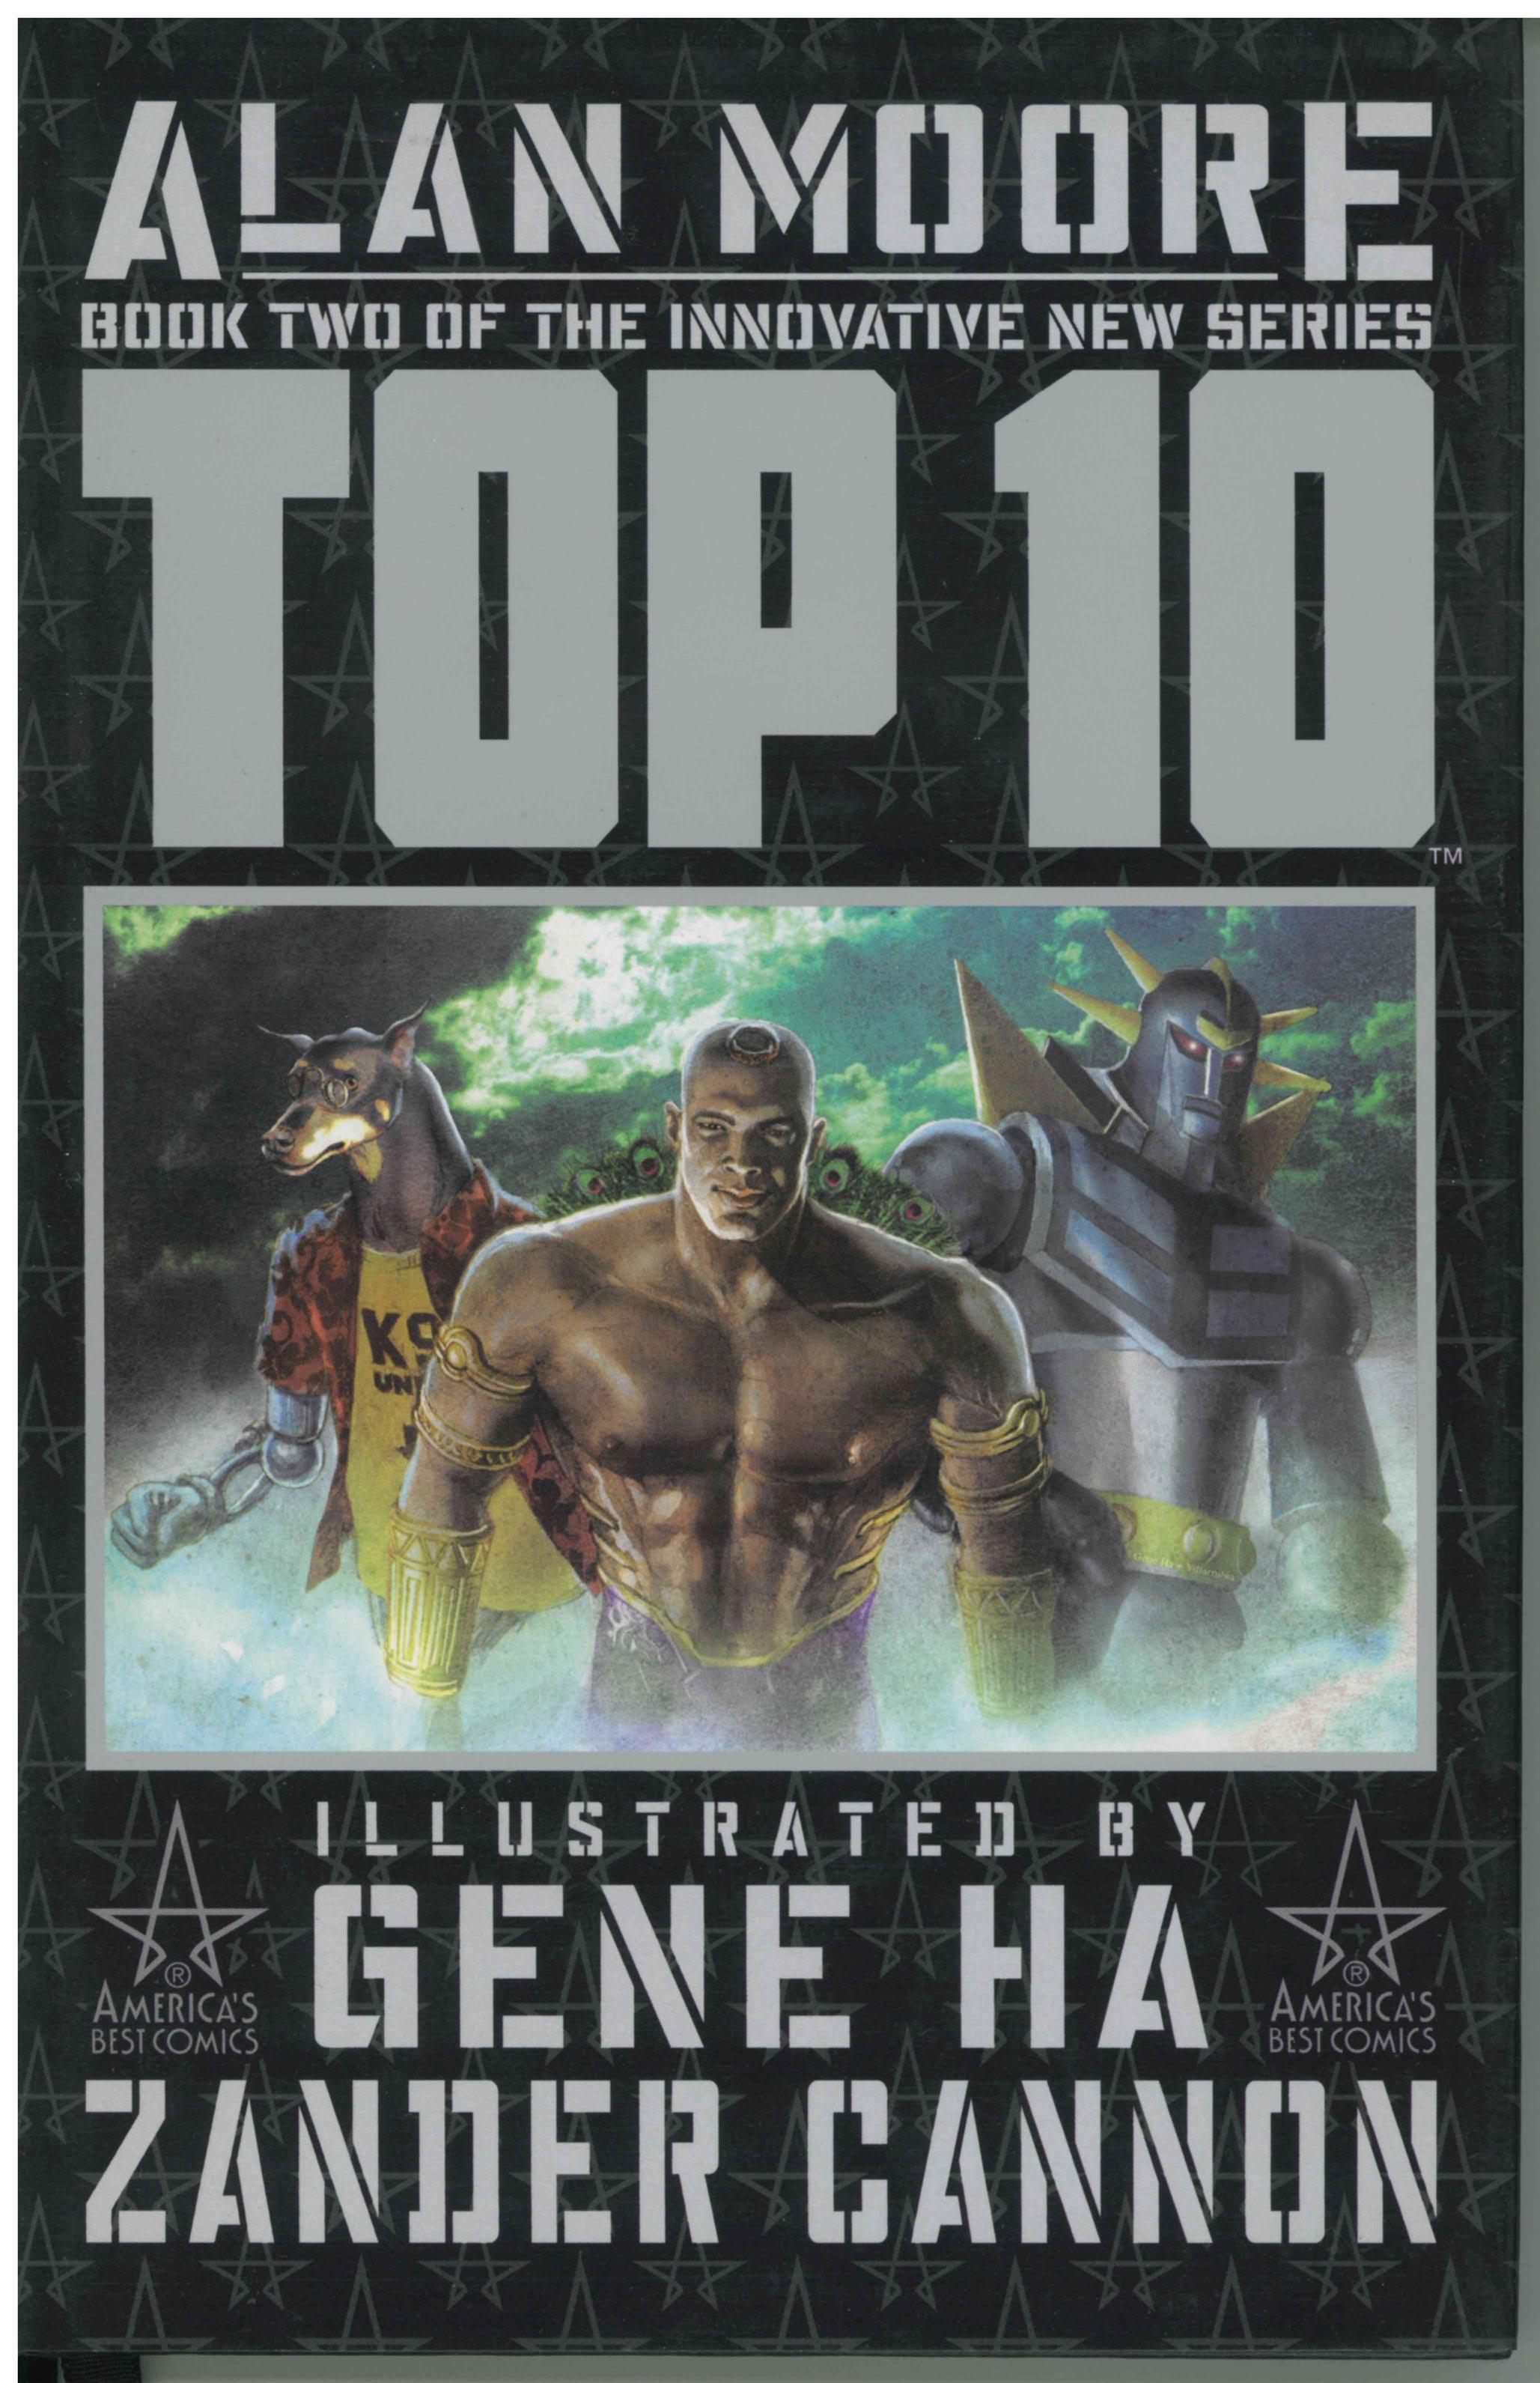 TOP 10 HC BOOK 02 - FIRST PRINTING (SEE NOTES)